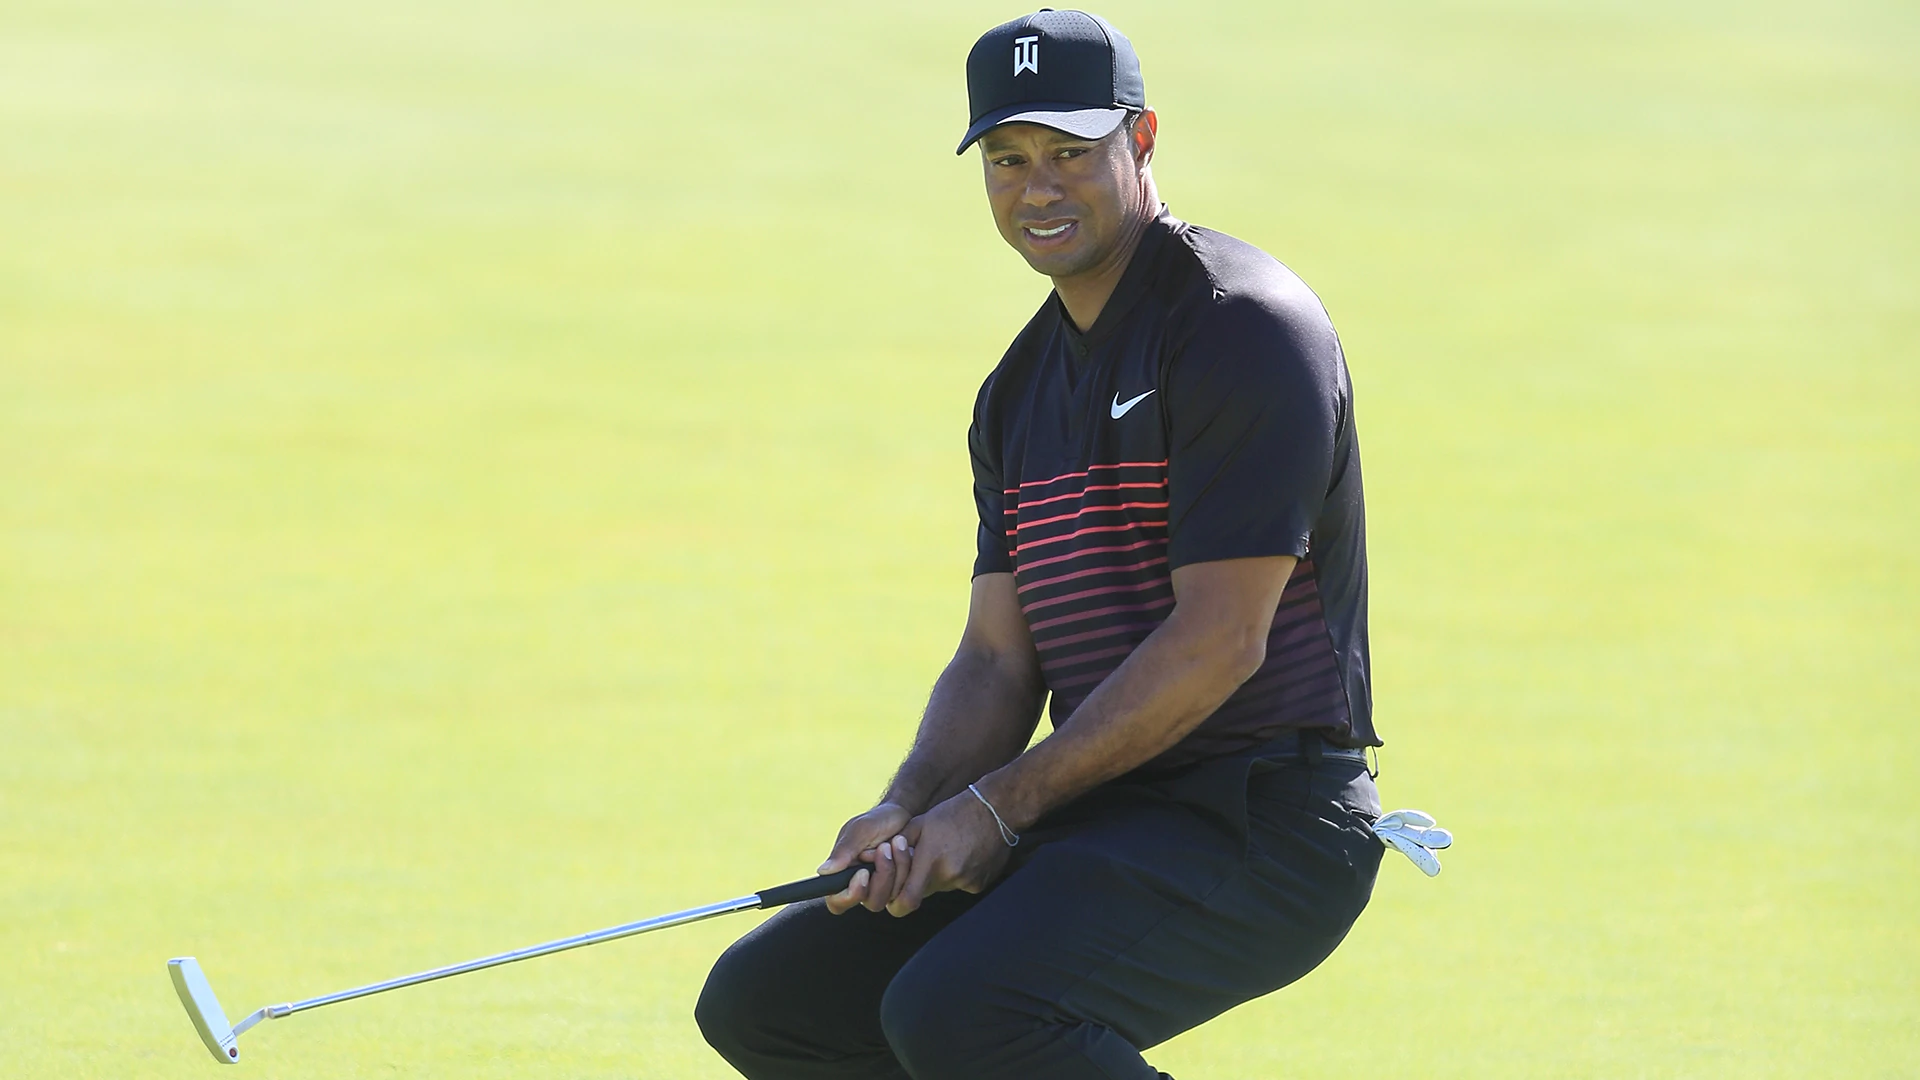 Woods happy to feel competitive nerves again